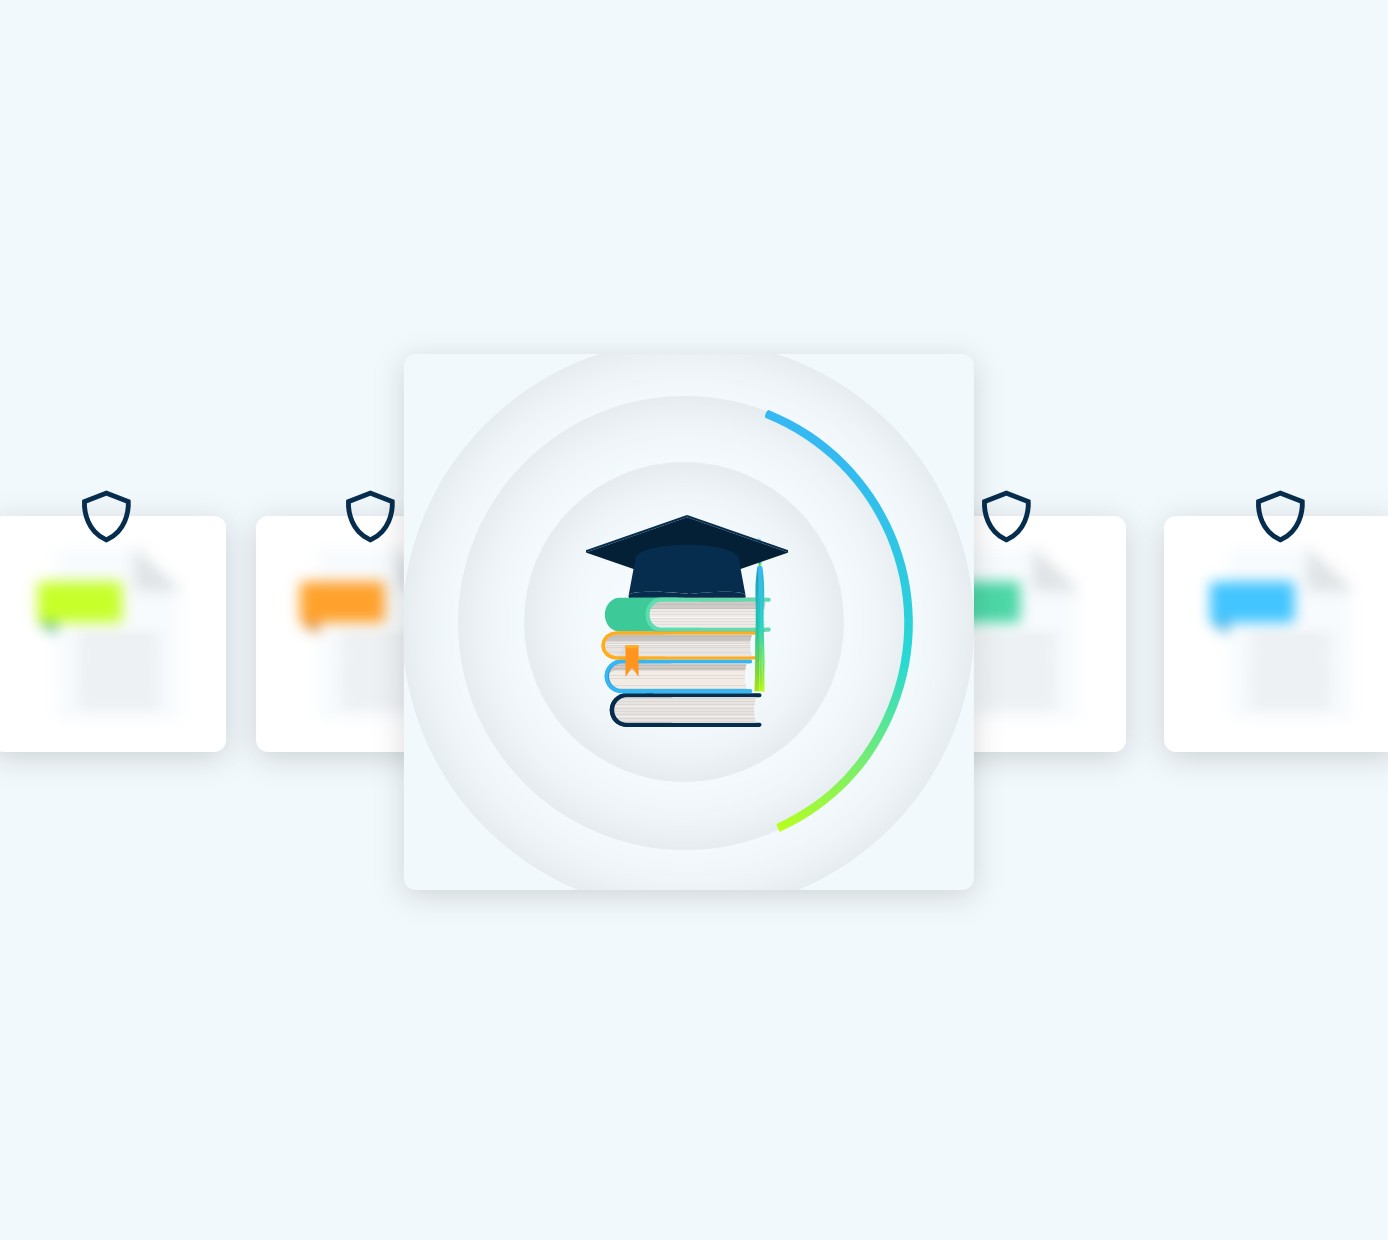 Higher Education book and Grad Cap icon selected in a menu